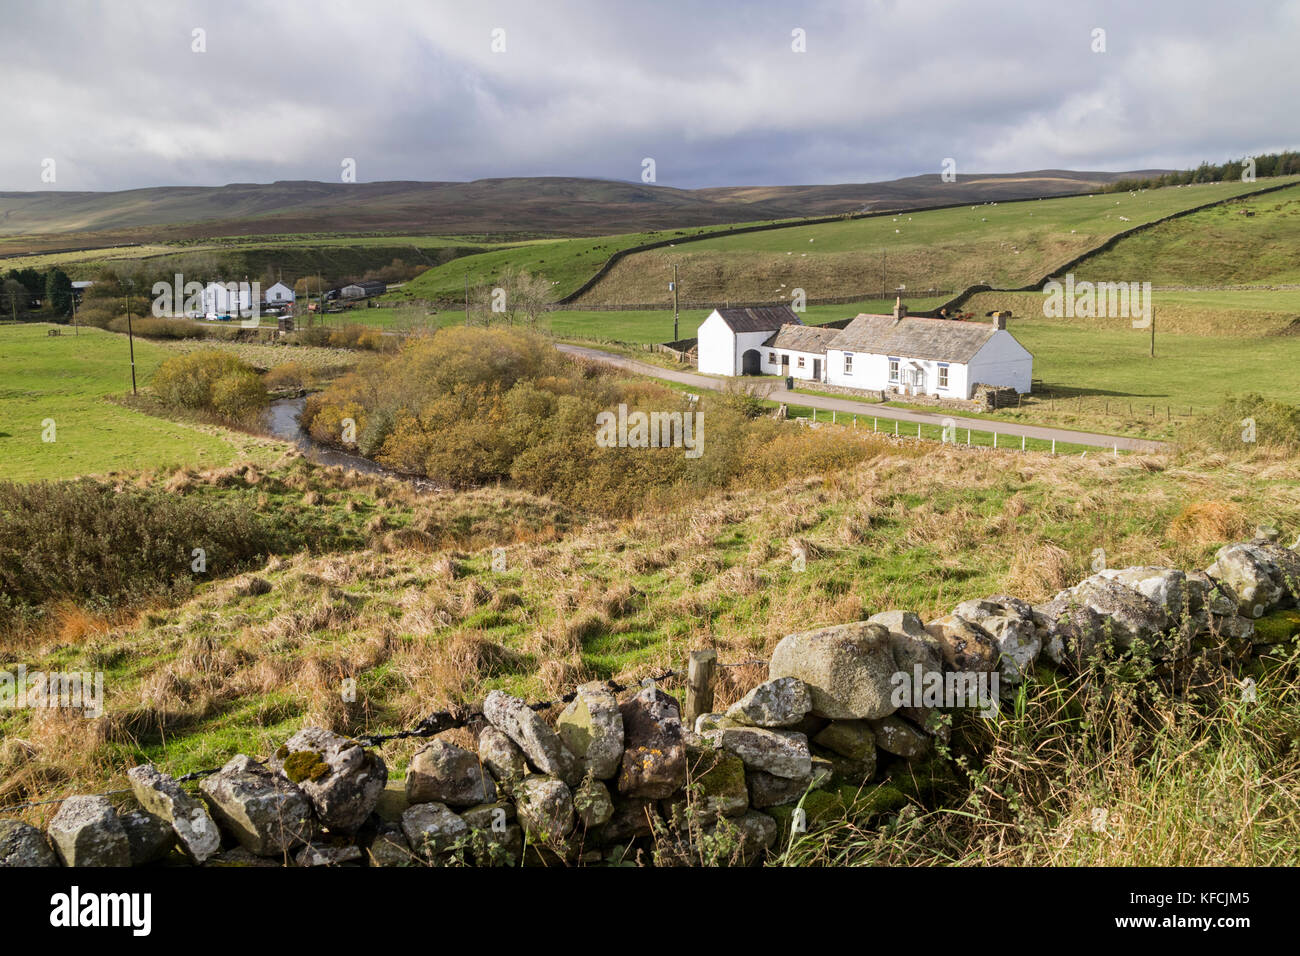 A remote farmhouse at Langdon Beck, Teasdale, County Durham, England, UK Stock Photo